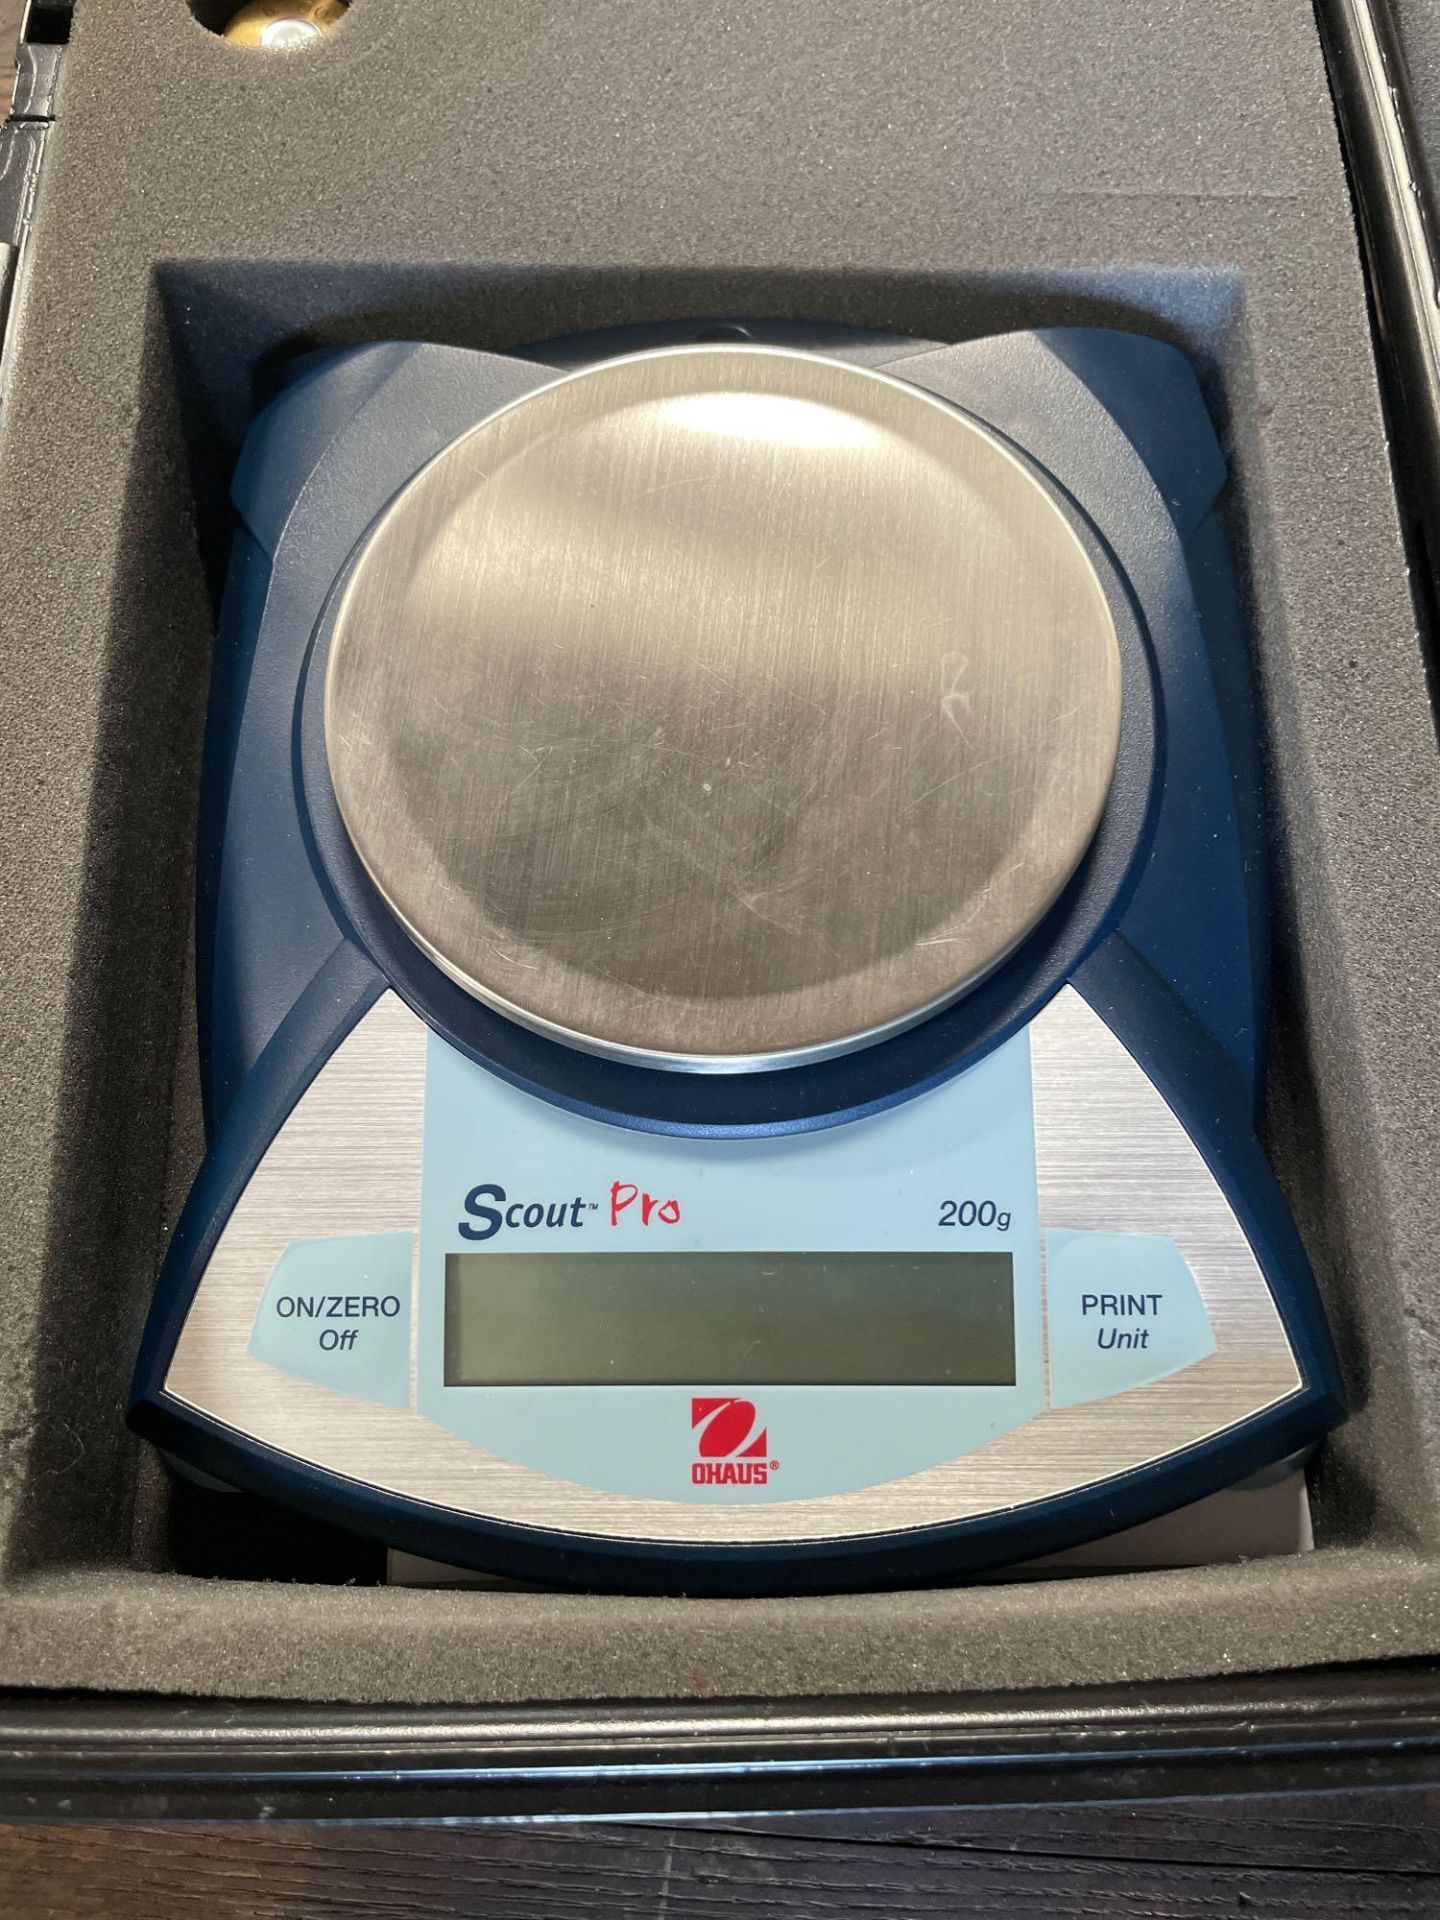 Scout Pro 200 G Digital Scale - Image 2 of 4